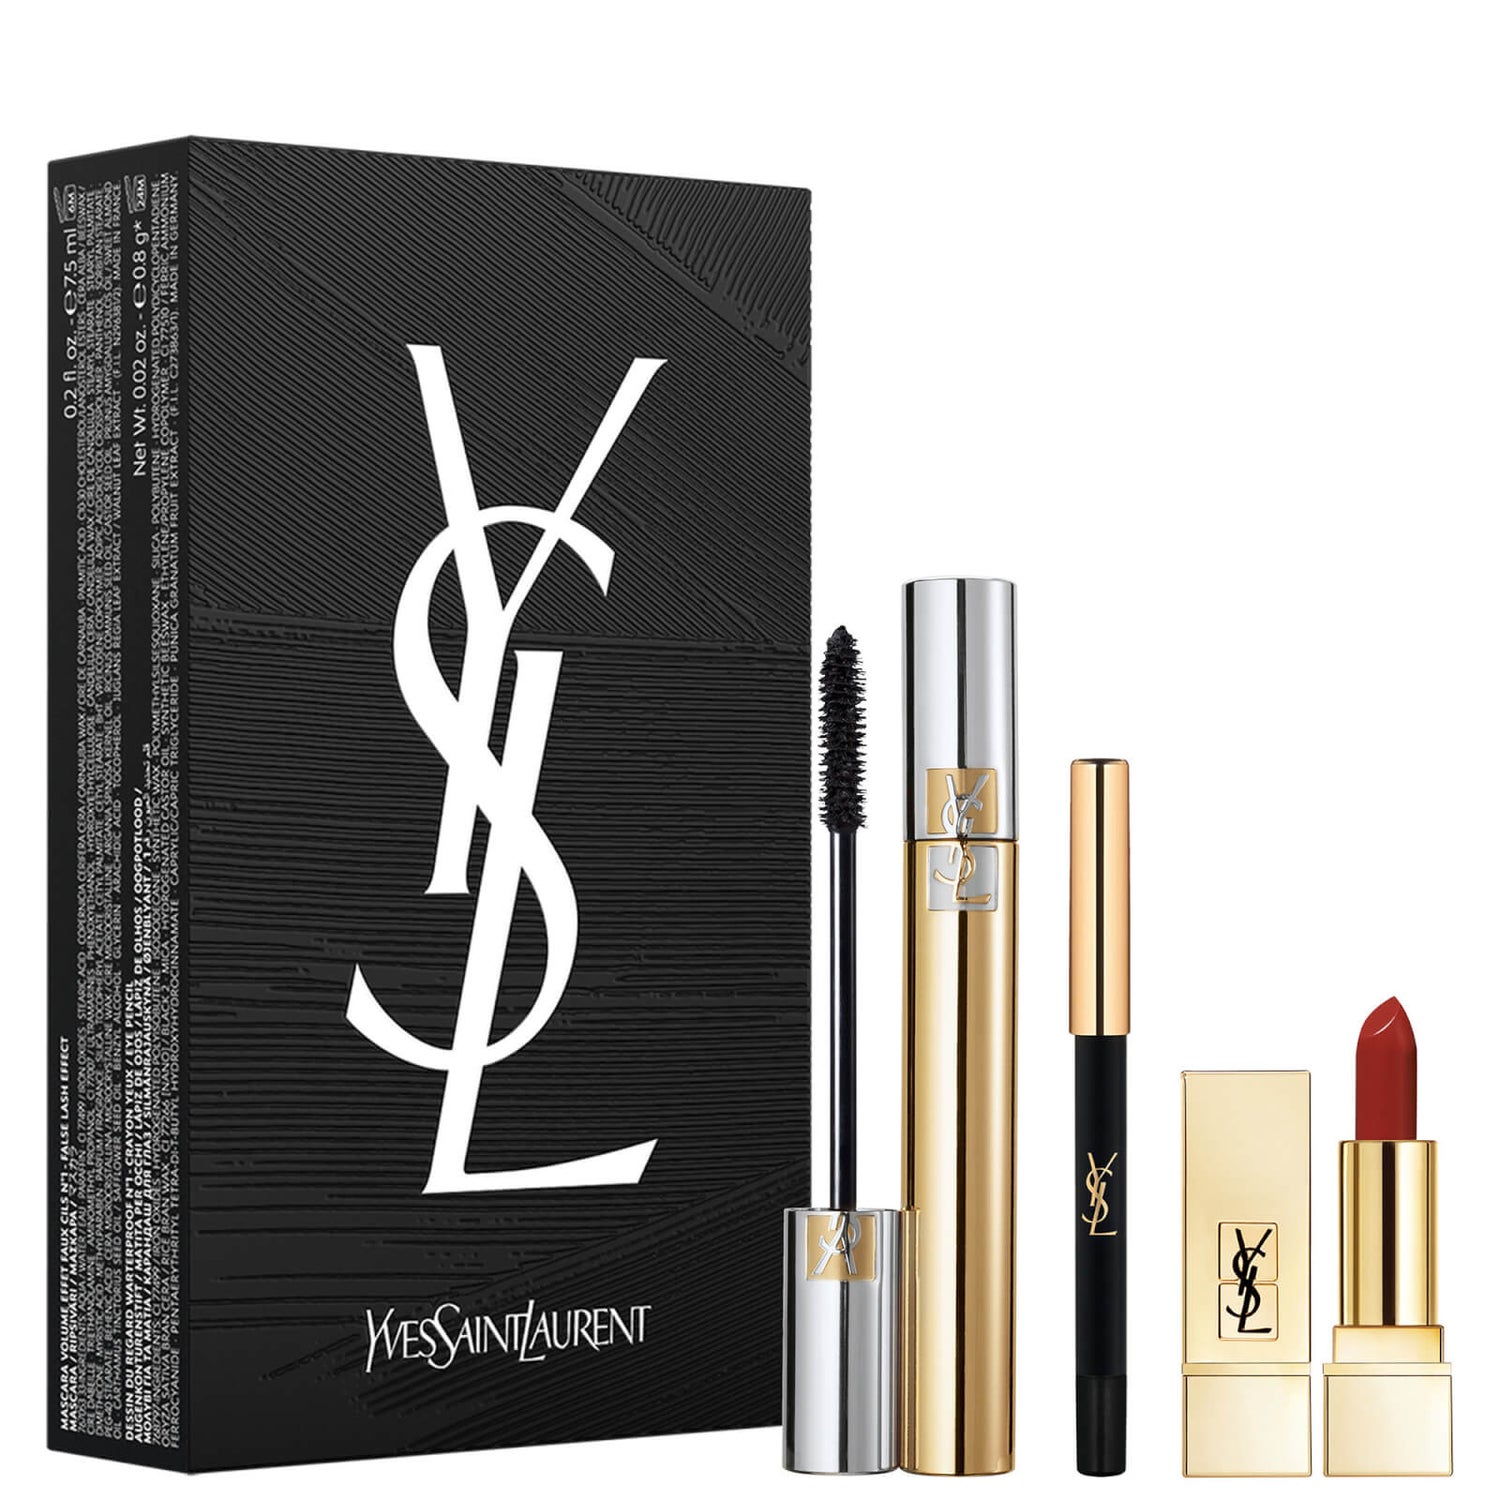 YSL Mascara Volume Effet Faux Cils Duo (Travel Selection)